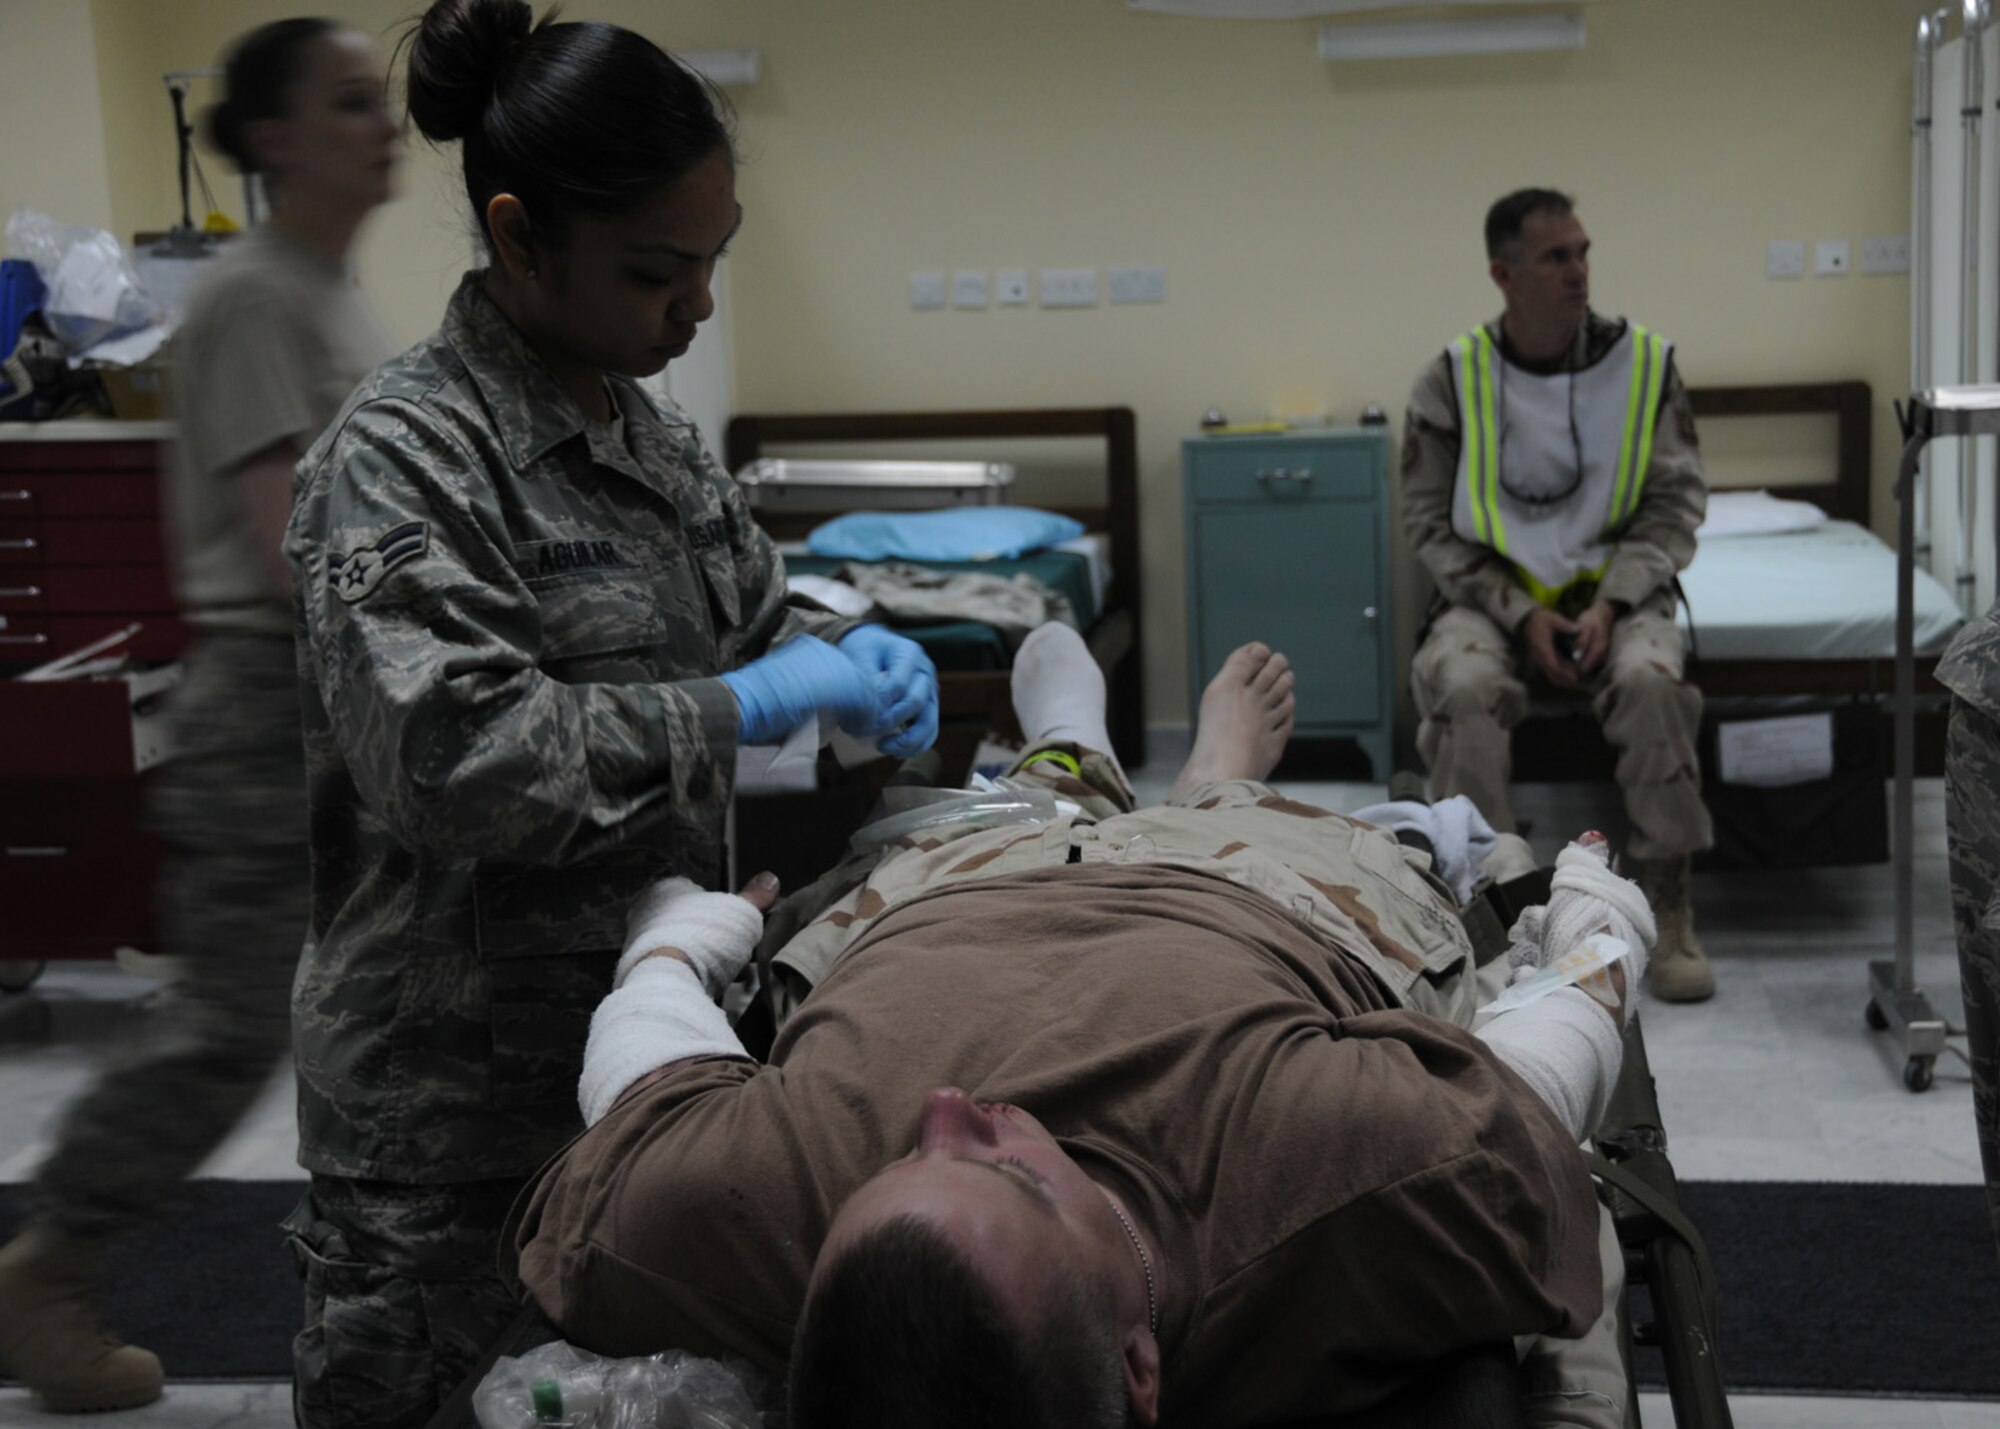 SOUTHWEST ASIA -- Airman 1st Class Alyssa Aguilar, 386th Expeditionary Medical Group, secures bandages on a simulated patient during a Base Response and Readiness Exercise at an air base in Southwest Asia, April 13. In the event of a real-world emergency, the patients are given initial treatment on the scene and then transferred to the nearest medical facility. Airman Aguilar is currently deployed from Wright- Patterson Air Force Base, Ohio, and is originally from Sacramento, California. (U.S. Air Force photo/ Senior Airman Courtney Richardson)